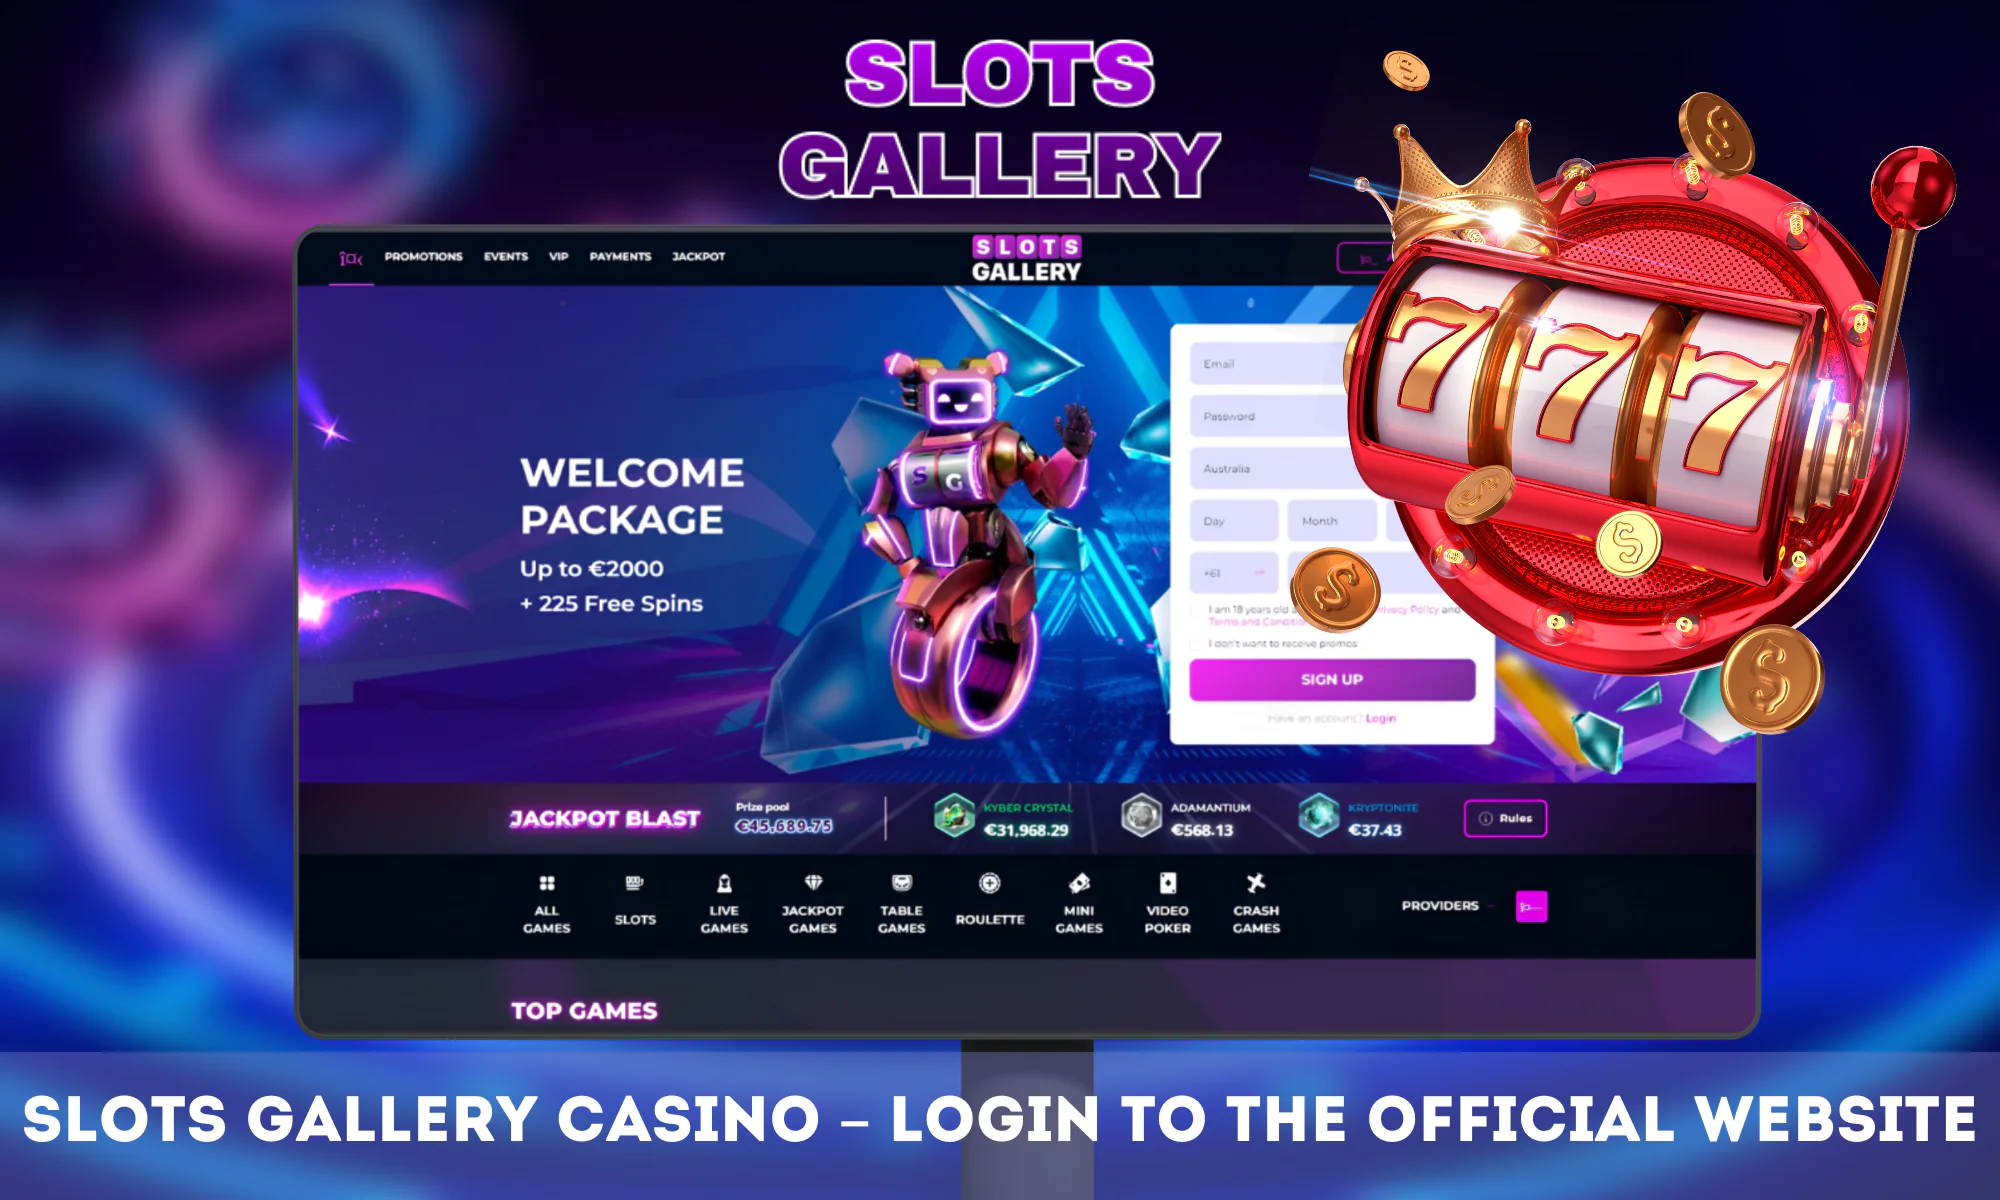 Meet Slots Gallery Casino the most popular casino on the internet